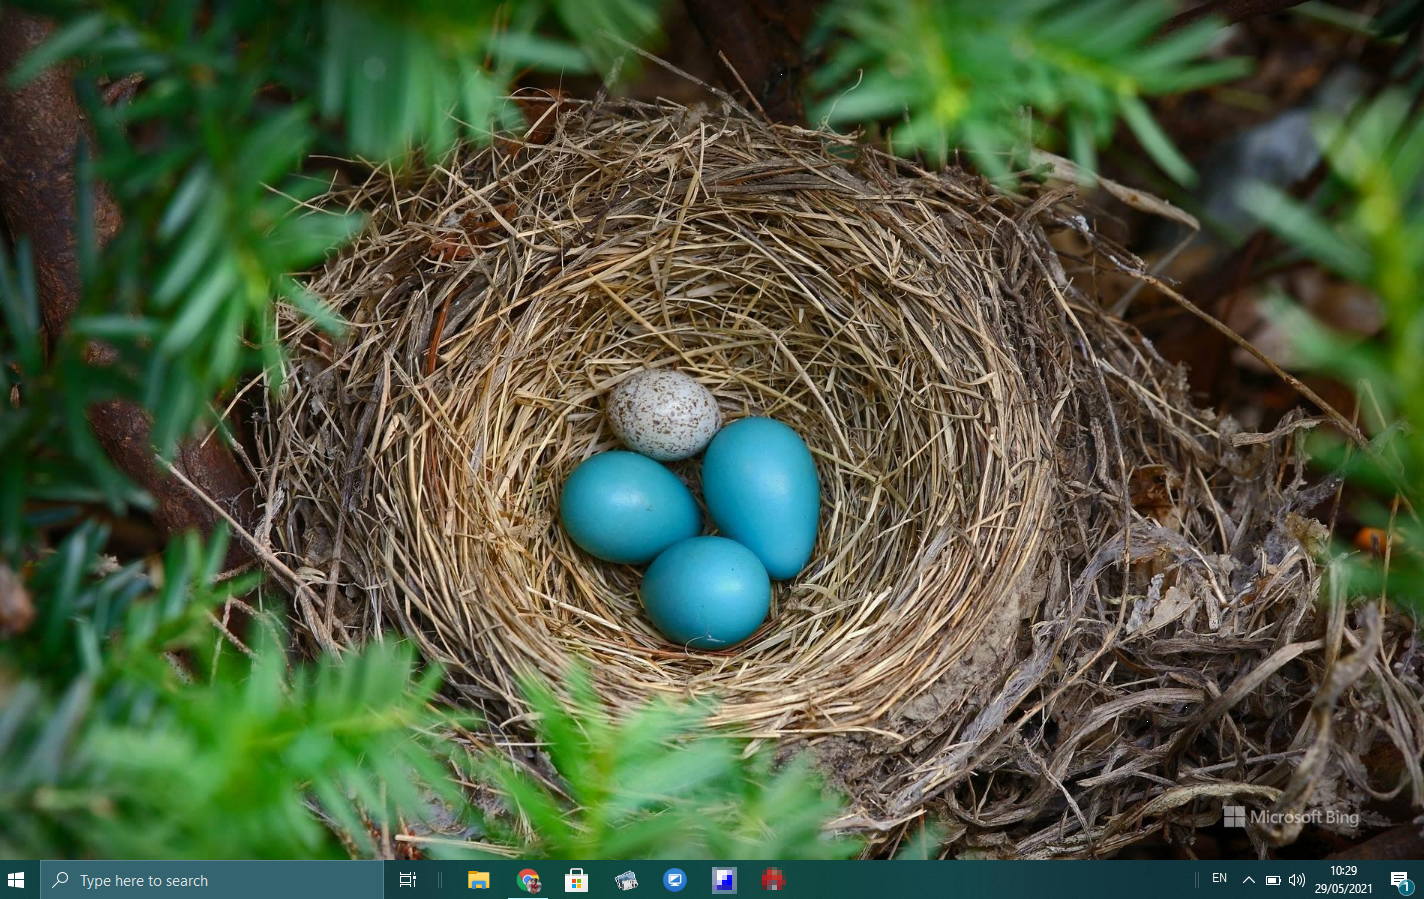 Download Windows 10 20H1 wallpaper and Bing wallpaper app here - Wb7themes